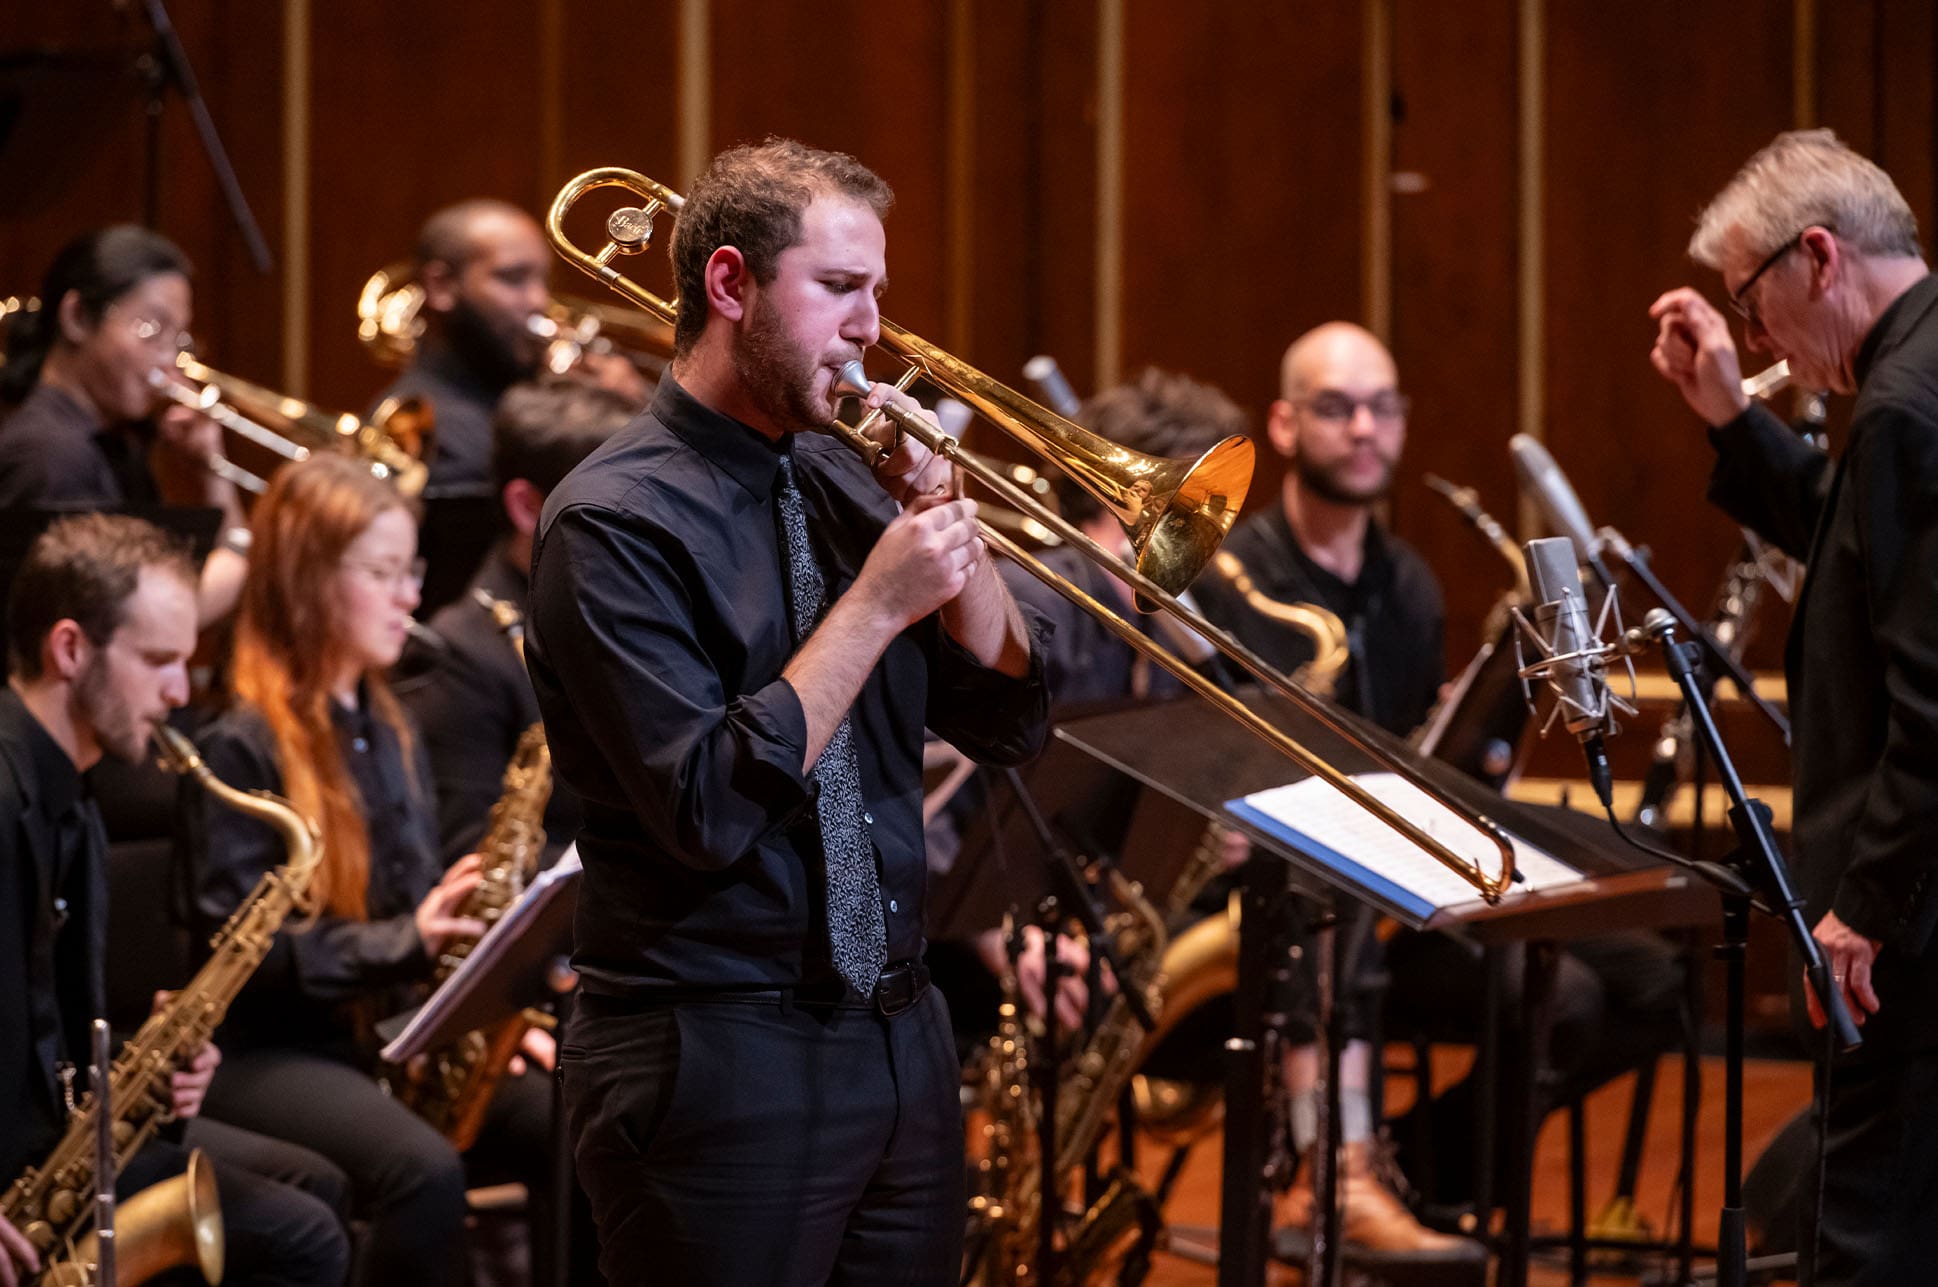 A student playing a trombone in an orchestra on Jordan Hall stage.